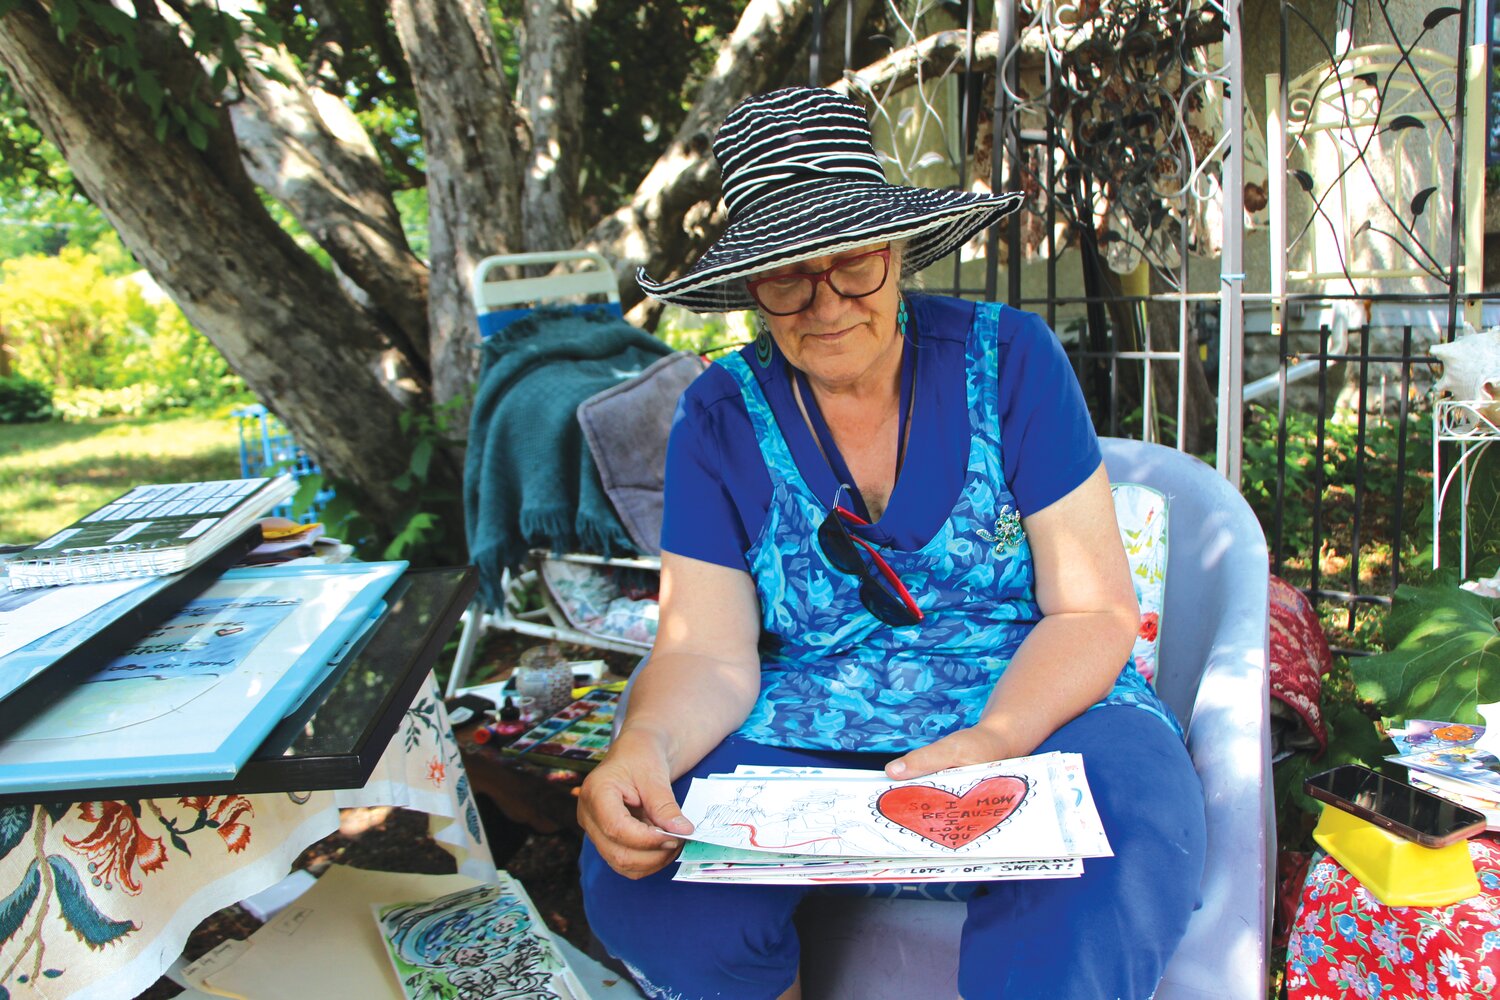 Anita White sits outside of her house, the “Amaranth Studio,” flipping through drawings she’s made over the years, of everyday life moments, including one of the four wedding rings she’s had and lost over the years. She made the drawing because she felt her husband telling her it was time to take off her wedding ring and move forward.